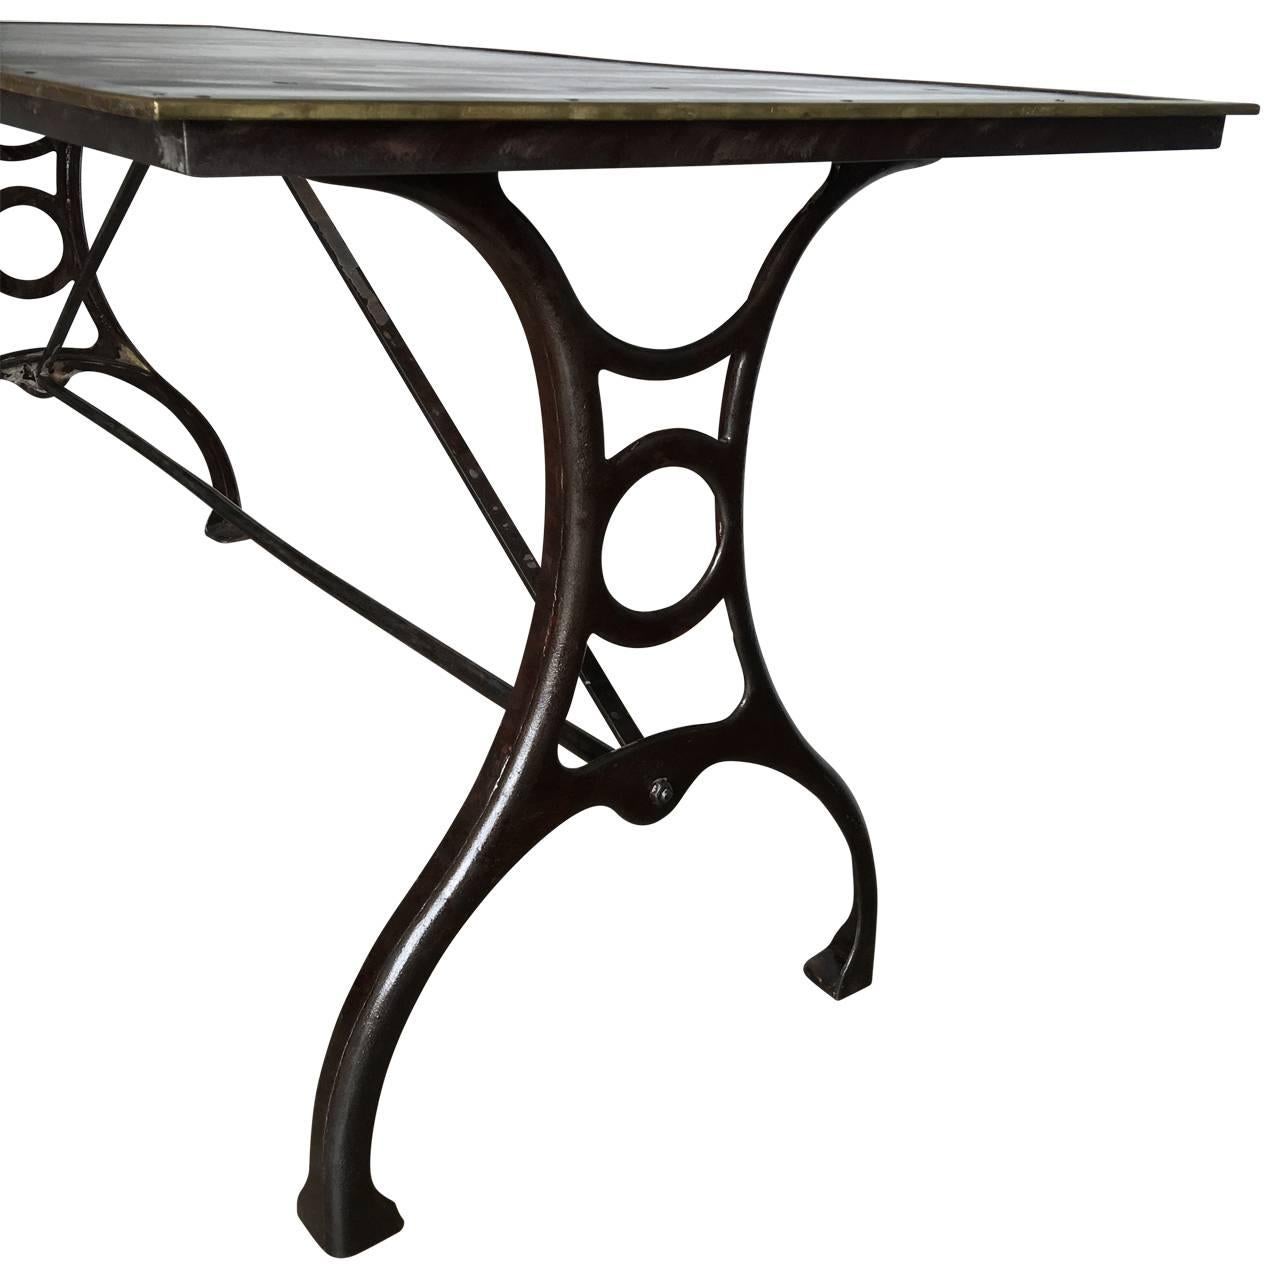 Early Industrial Table From The National Geographic Society 4